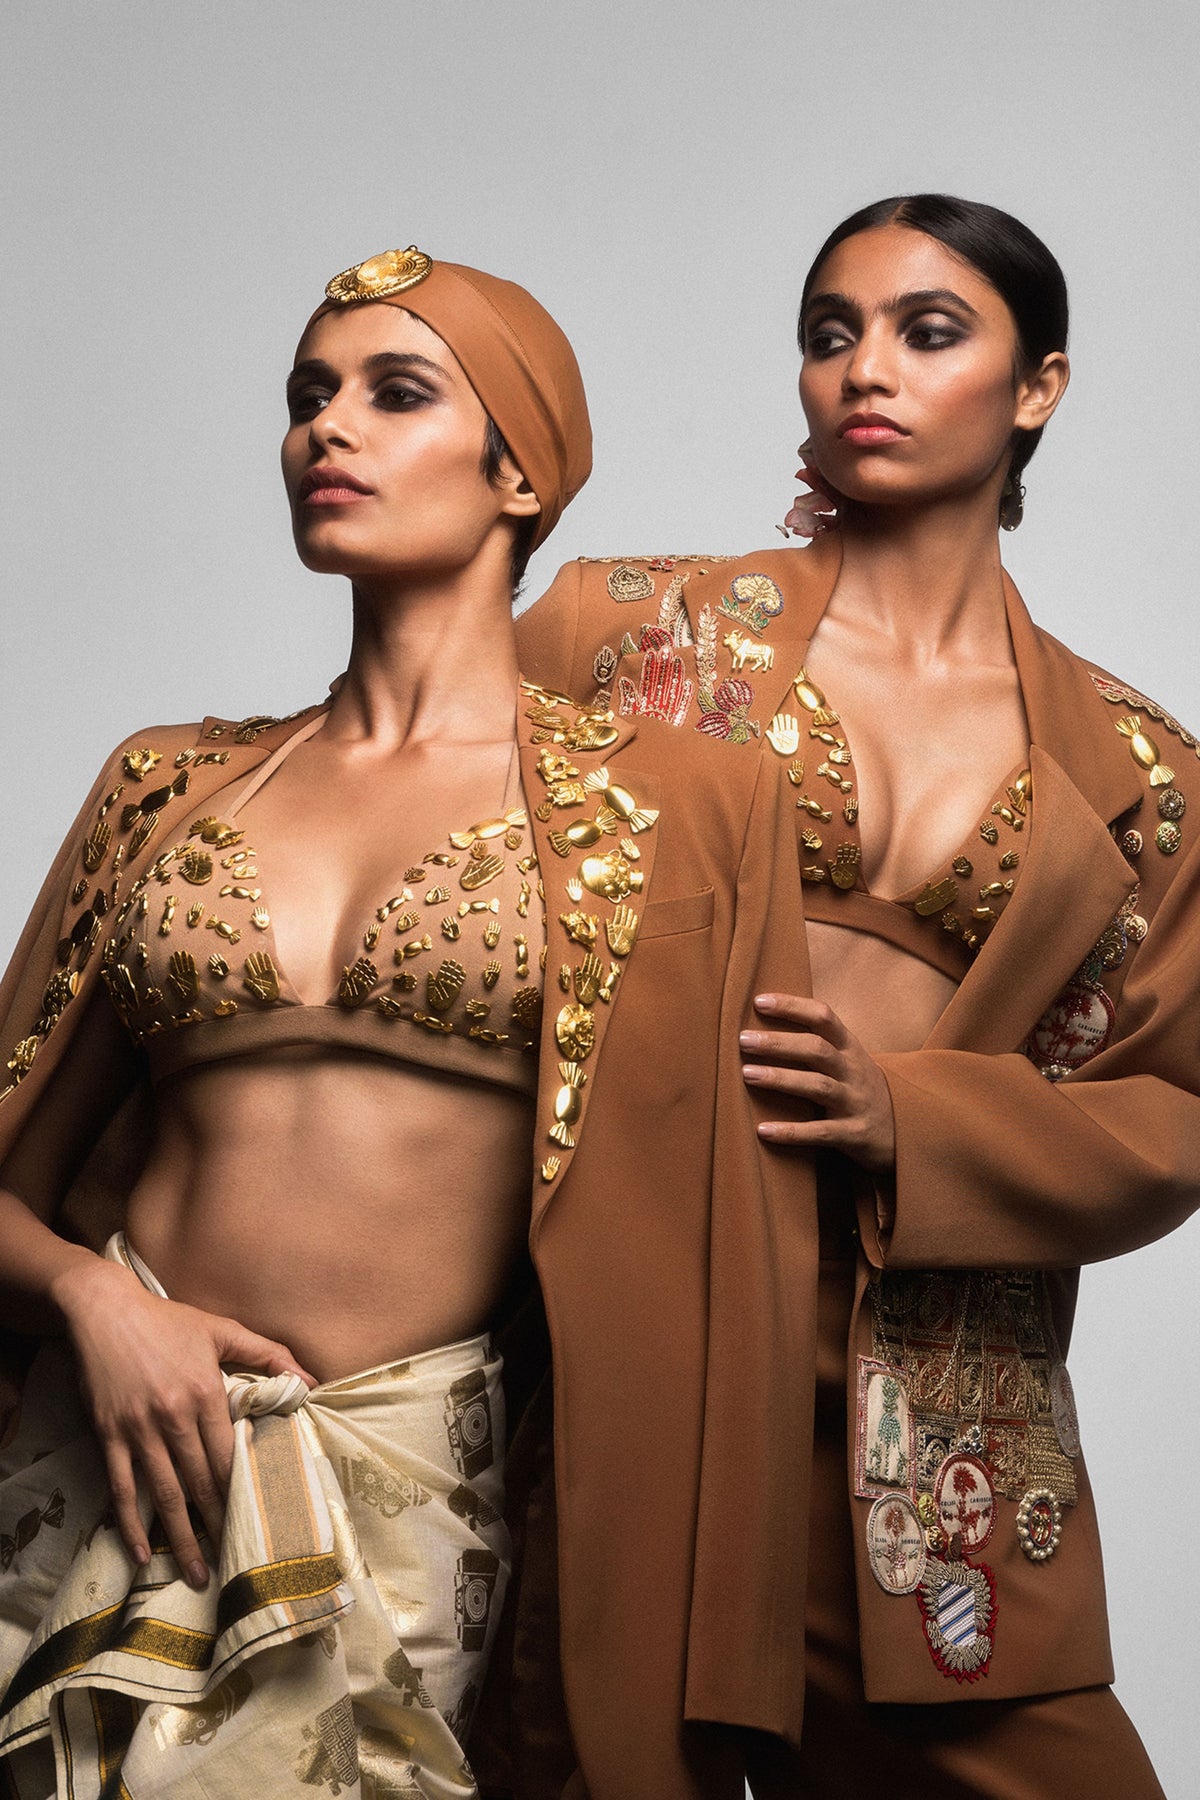 The Tan Trophy Jacket With Bra